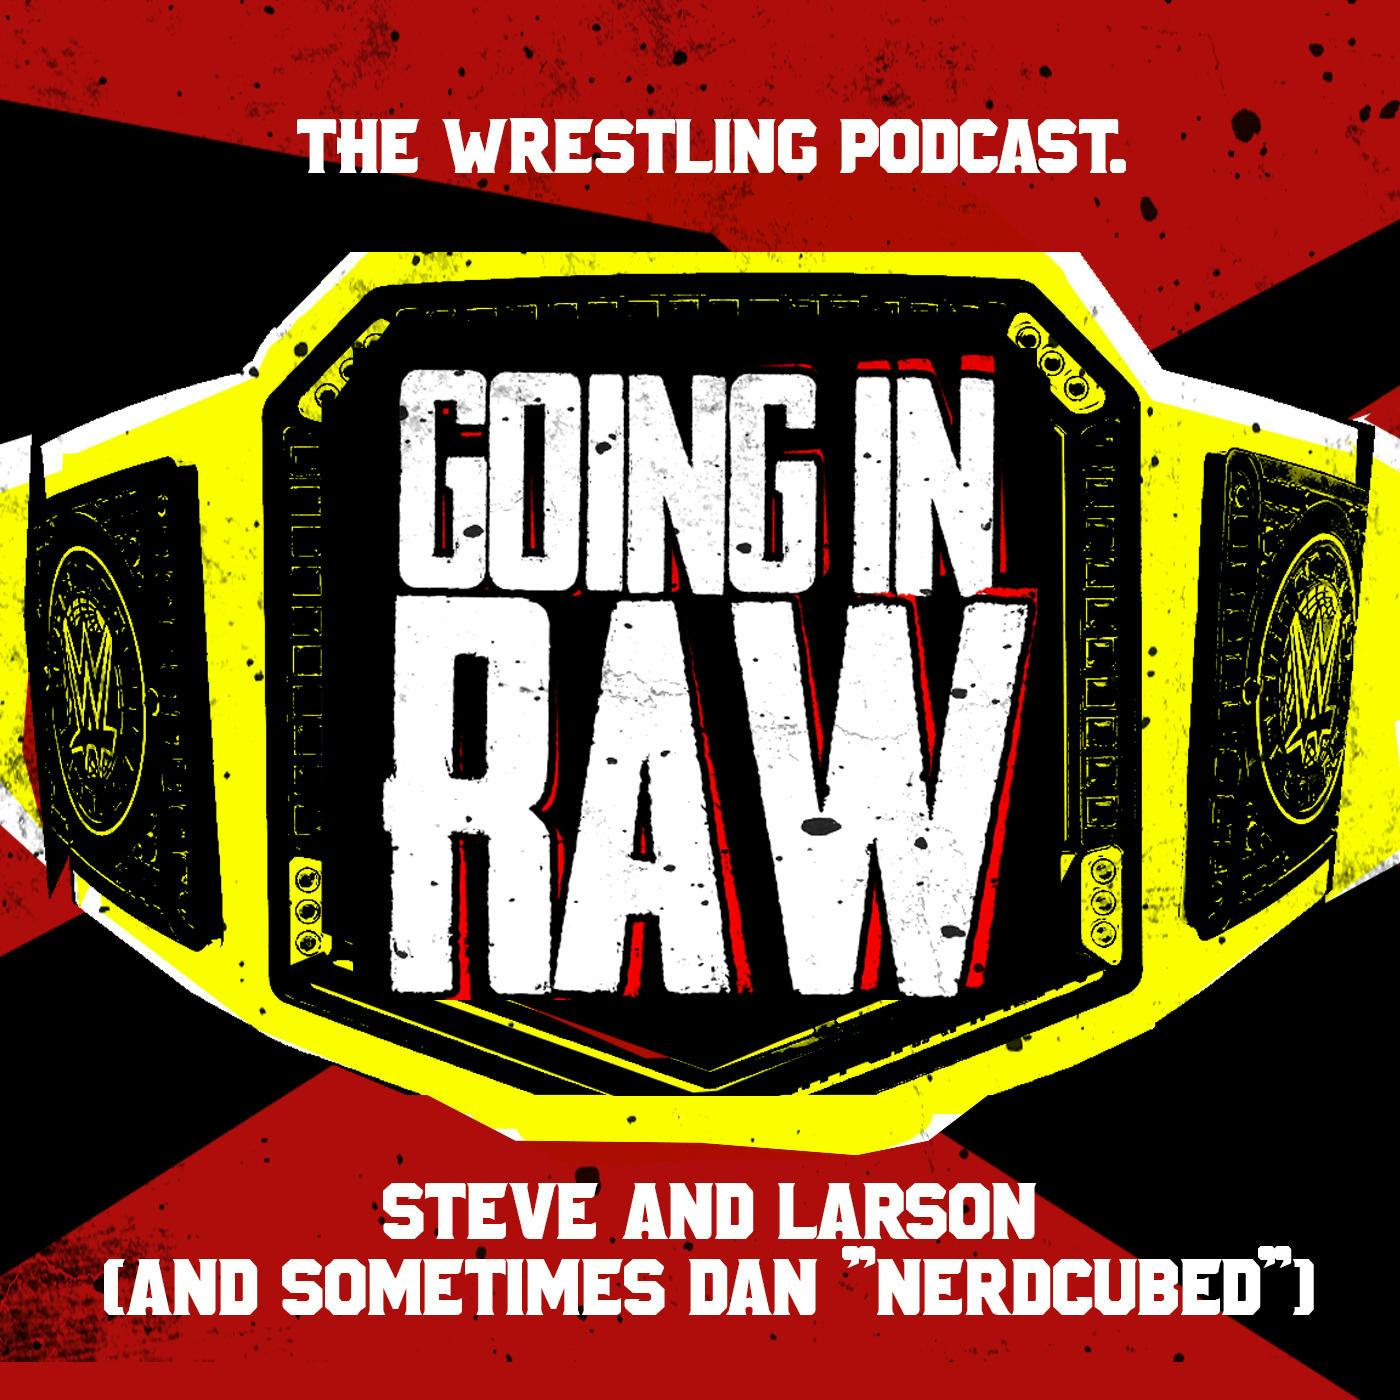 BOBBY ROODE BETTER AS A FACE? WHO IS WWE’S TOP HIGH FLYER? (Going In Raw Dirt Sheet Podcast Ep. 65)